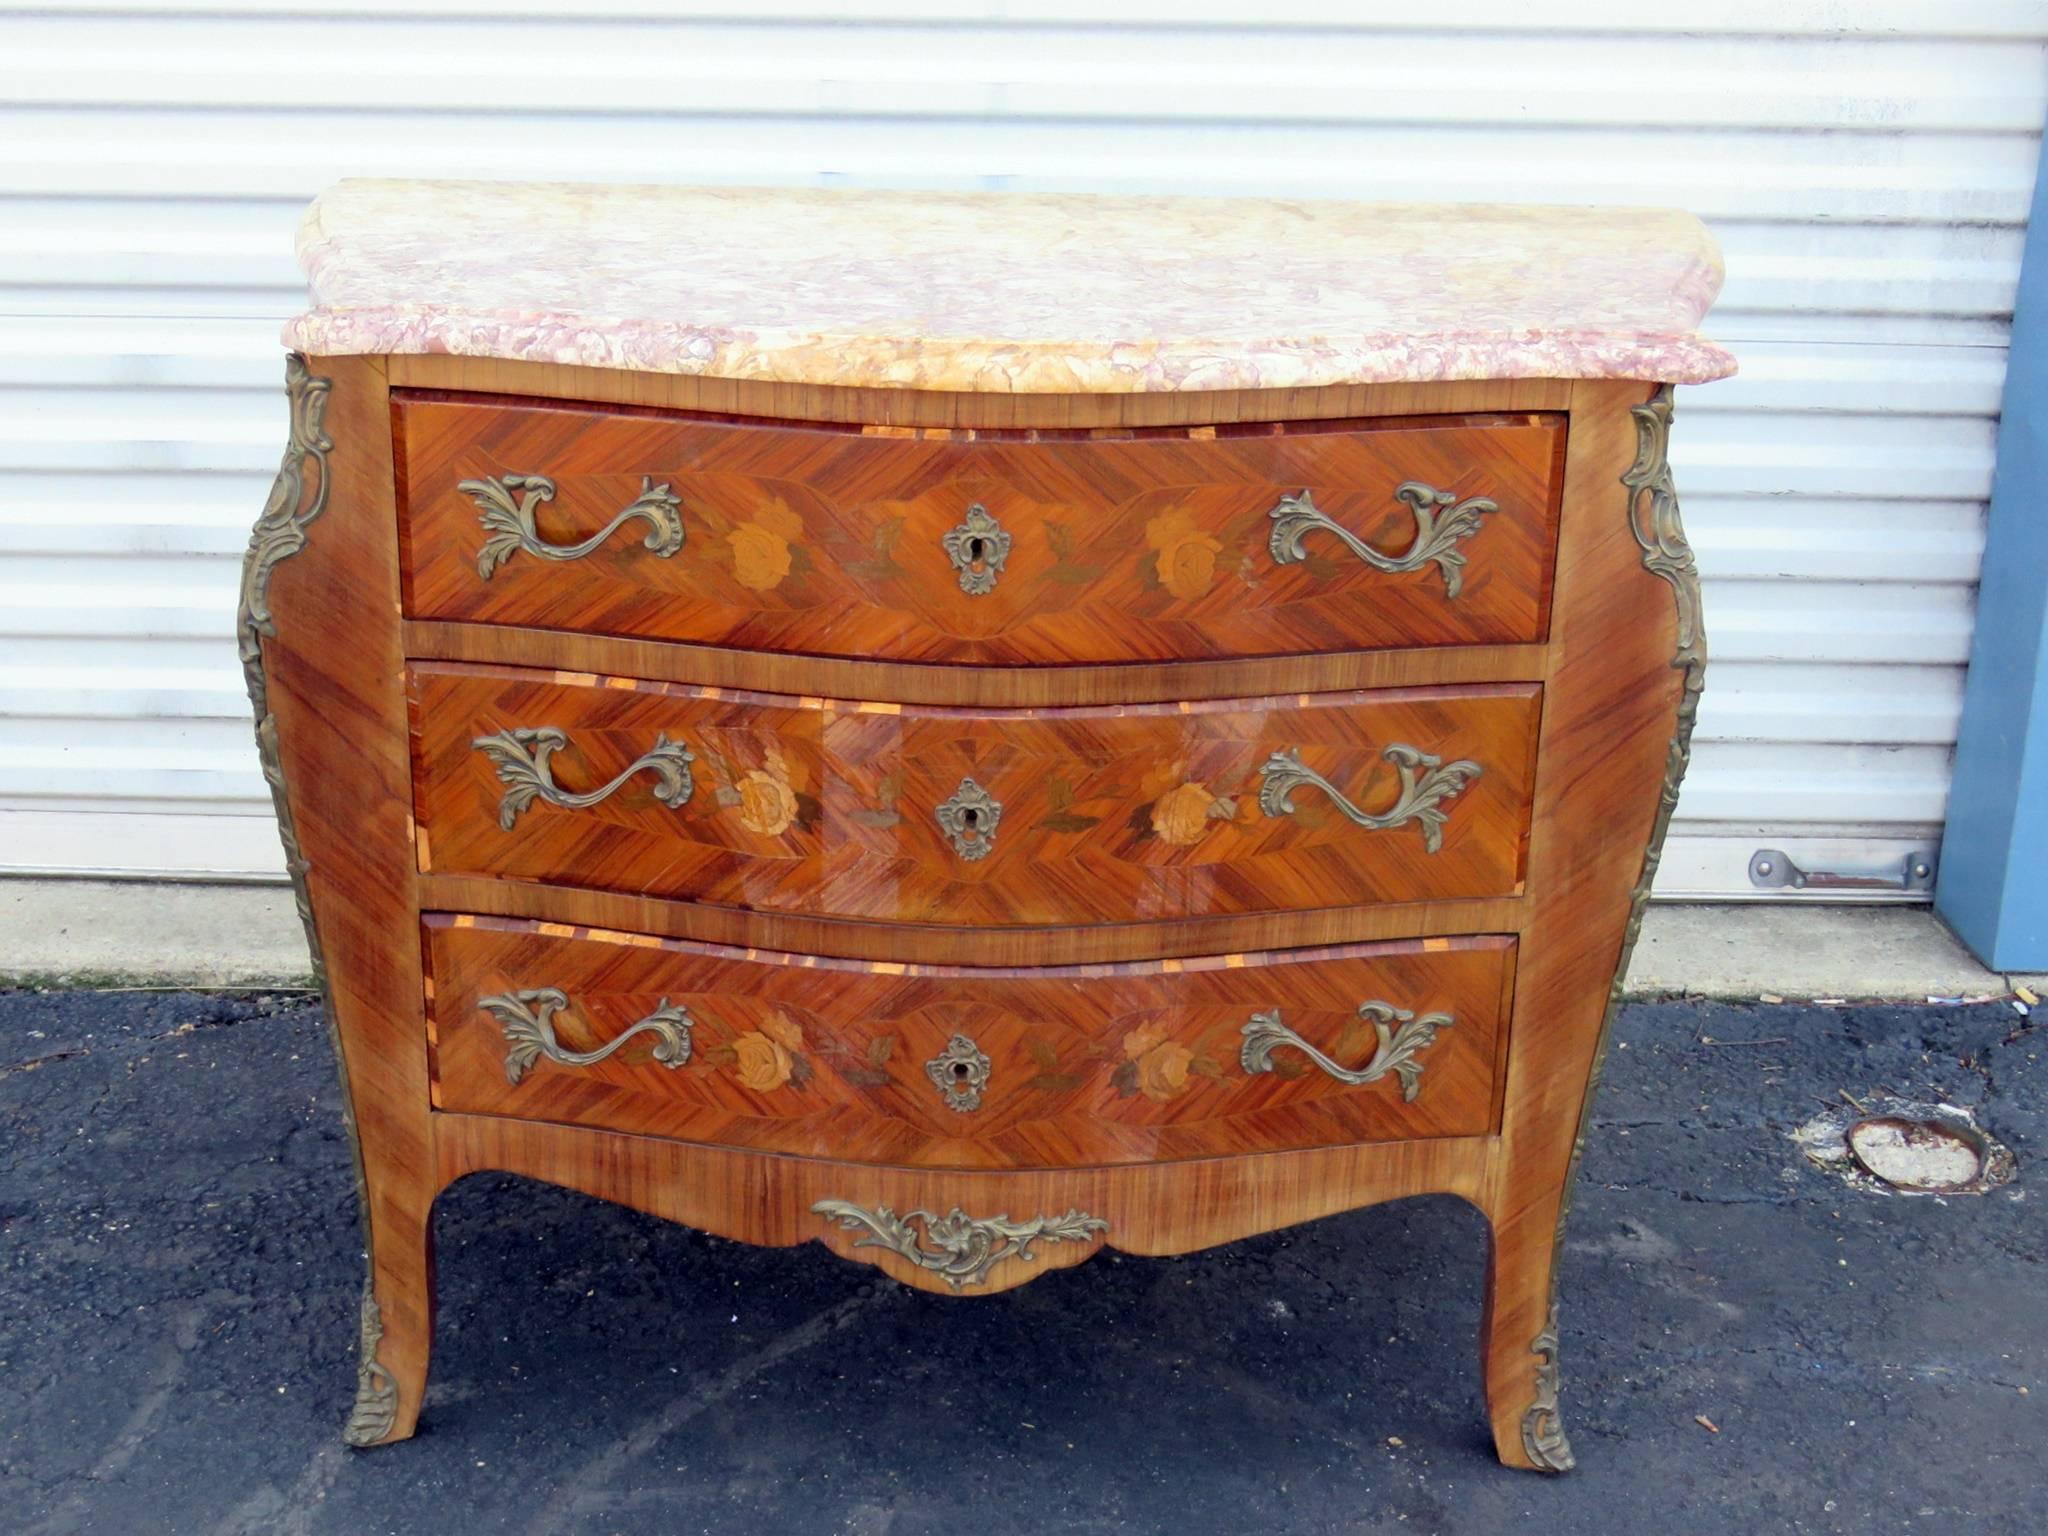 Louis XVI style marble top inlaid commode with three drawers and bronze mounts.